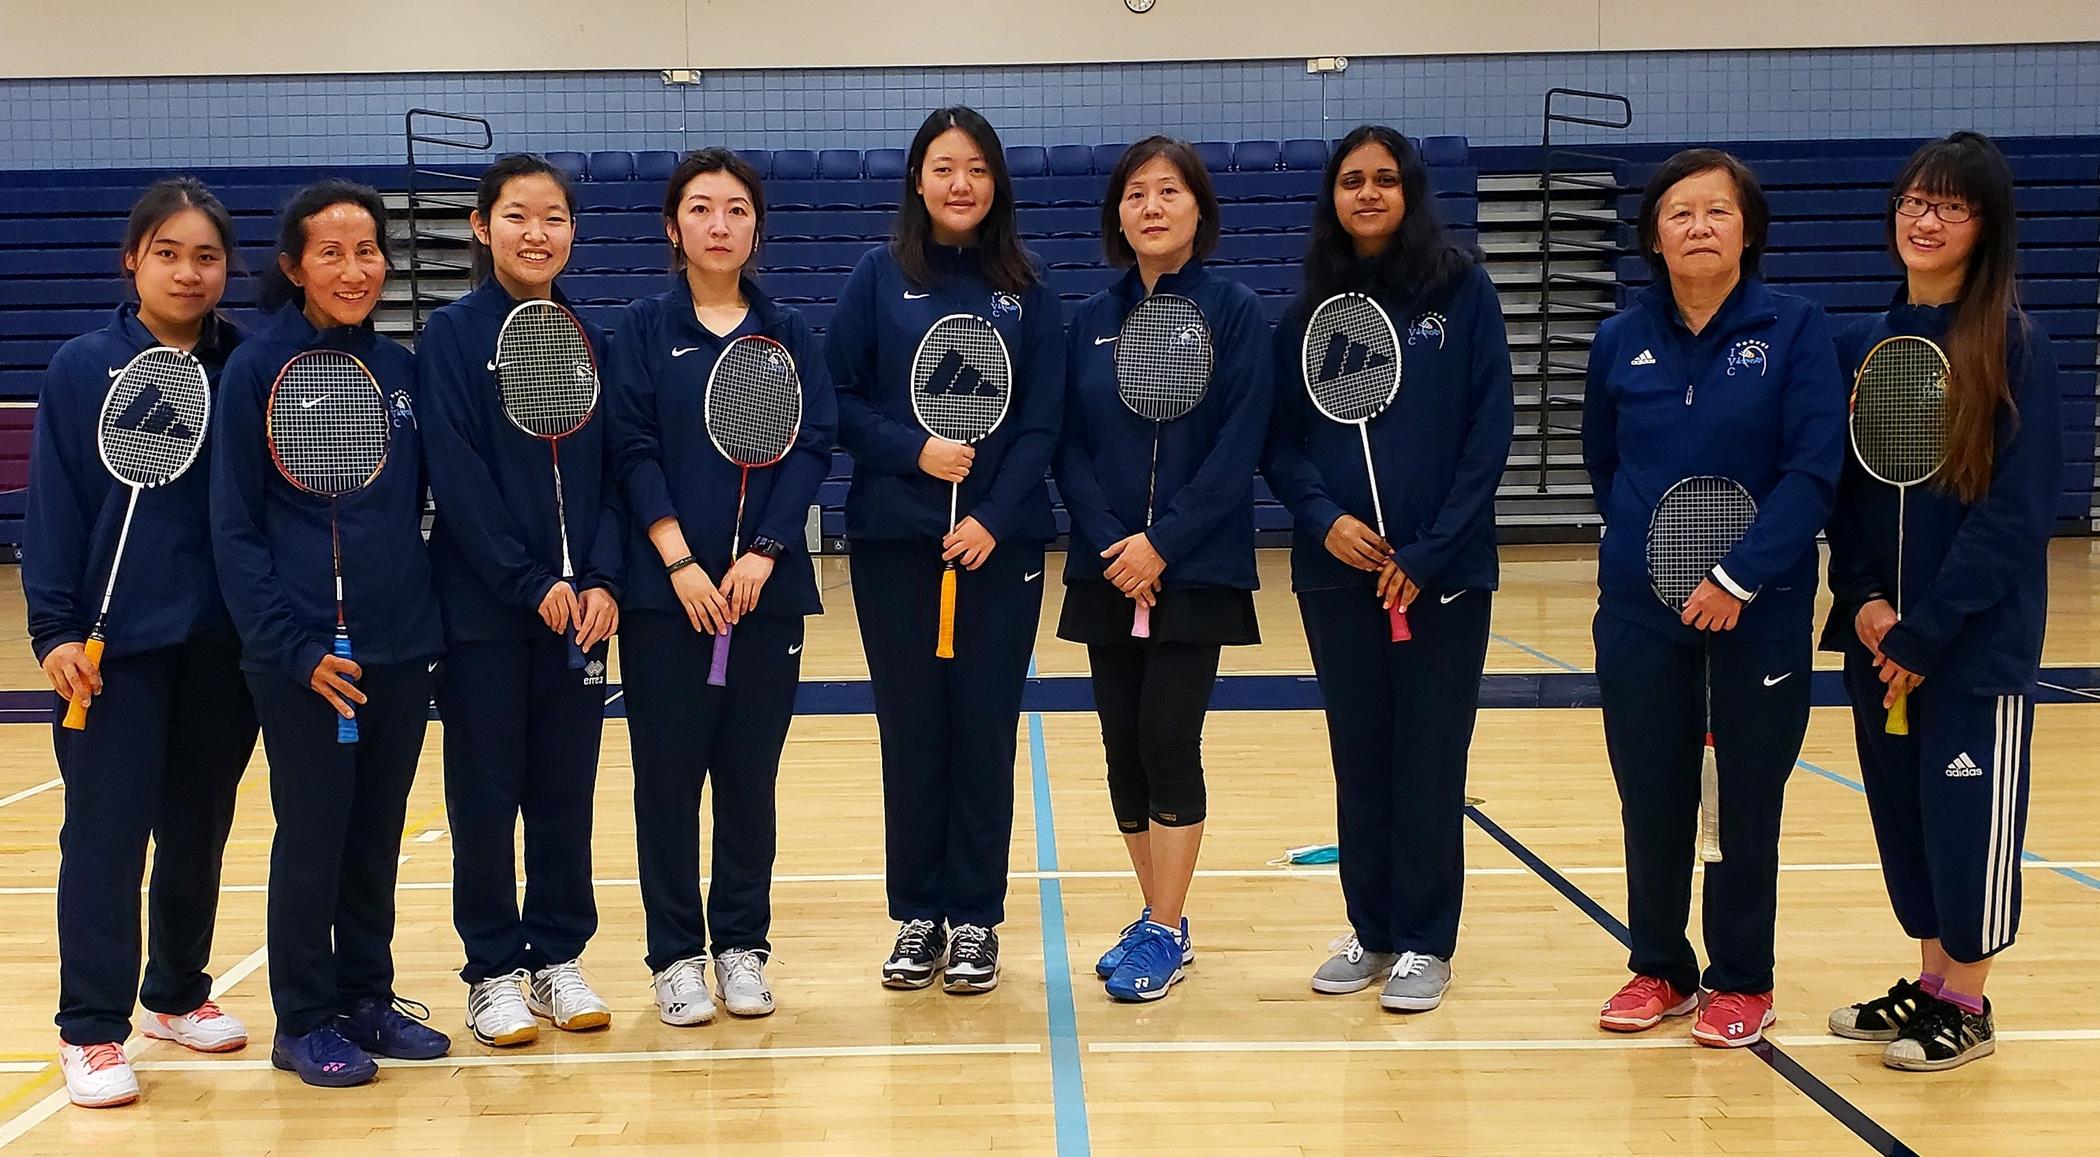 Women's badminton team goes after conference title Friday